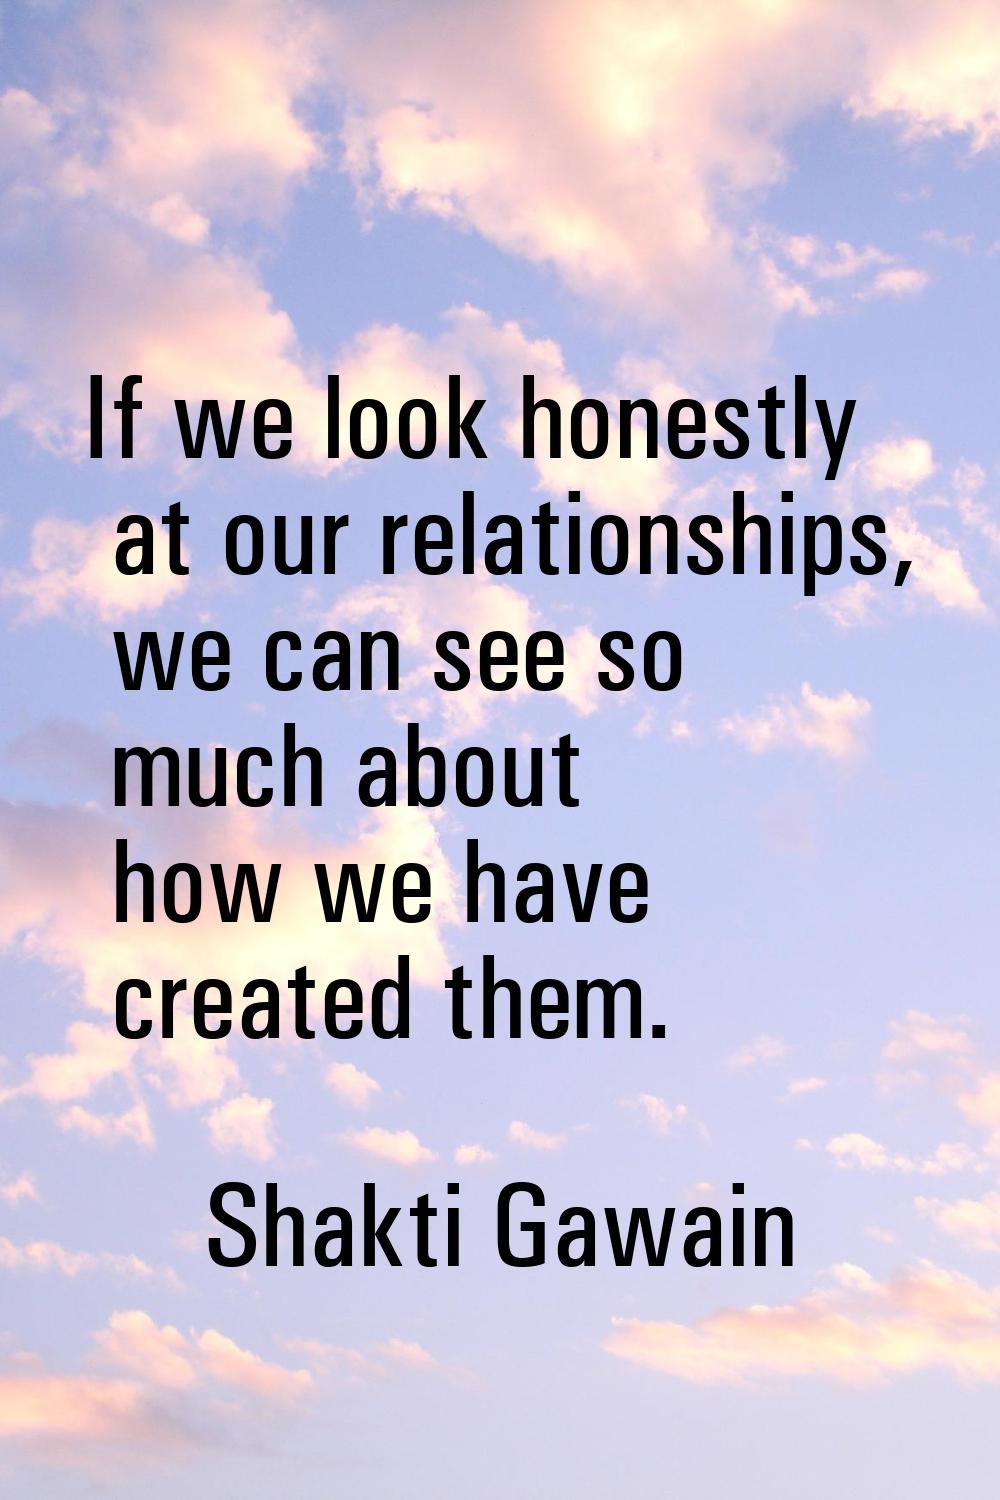 If we look honestly at our relationships, we can see so much about how we have created them.